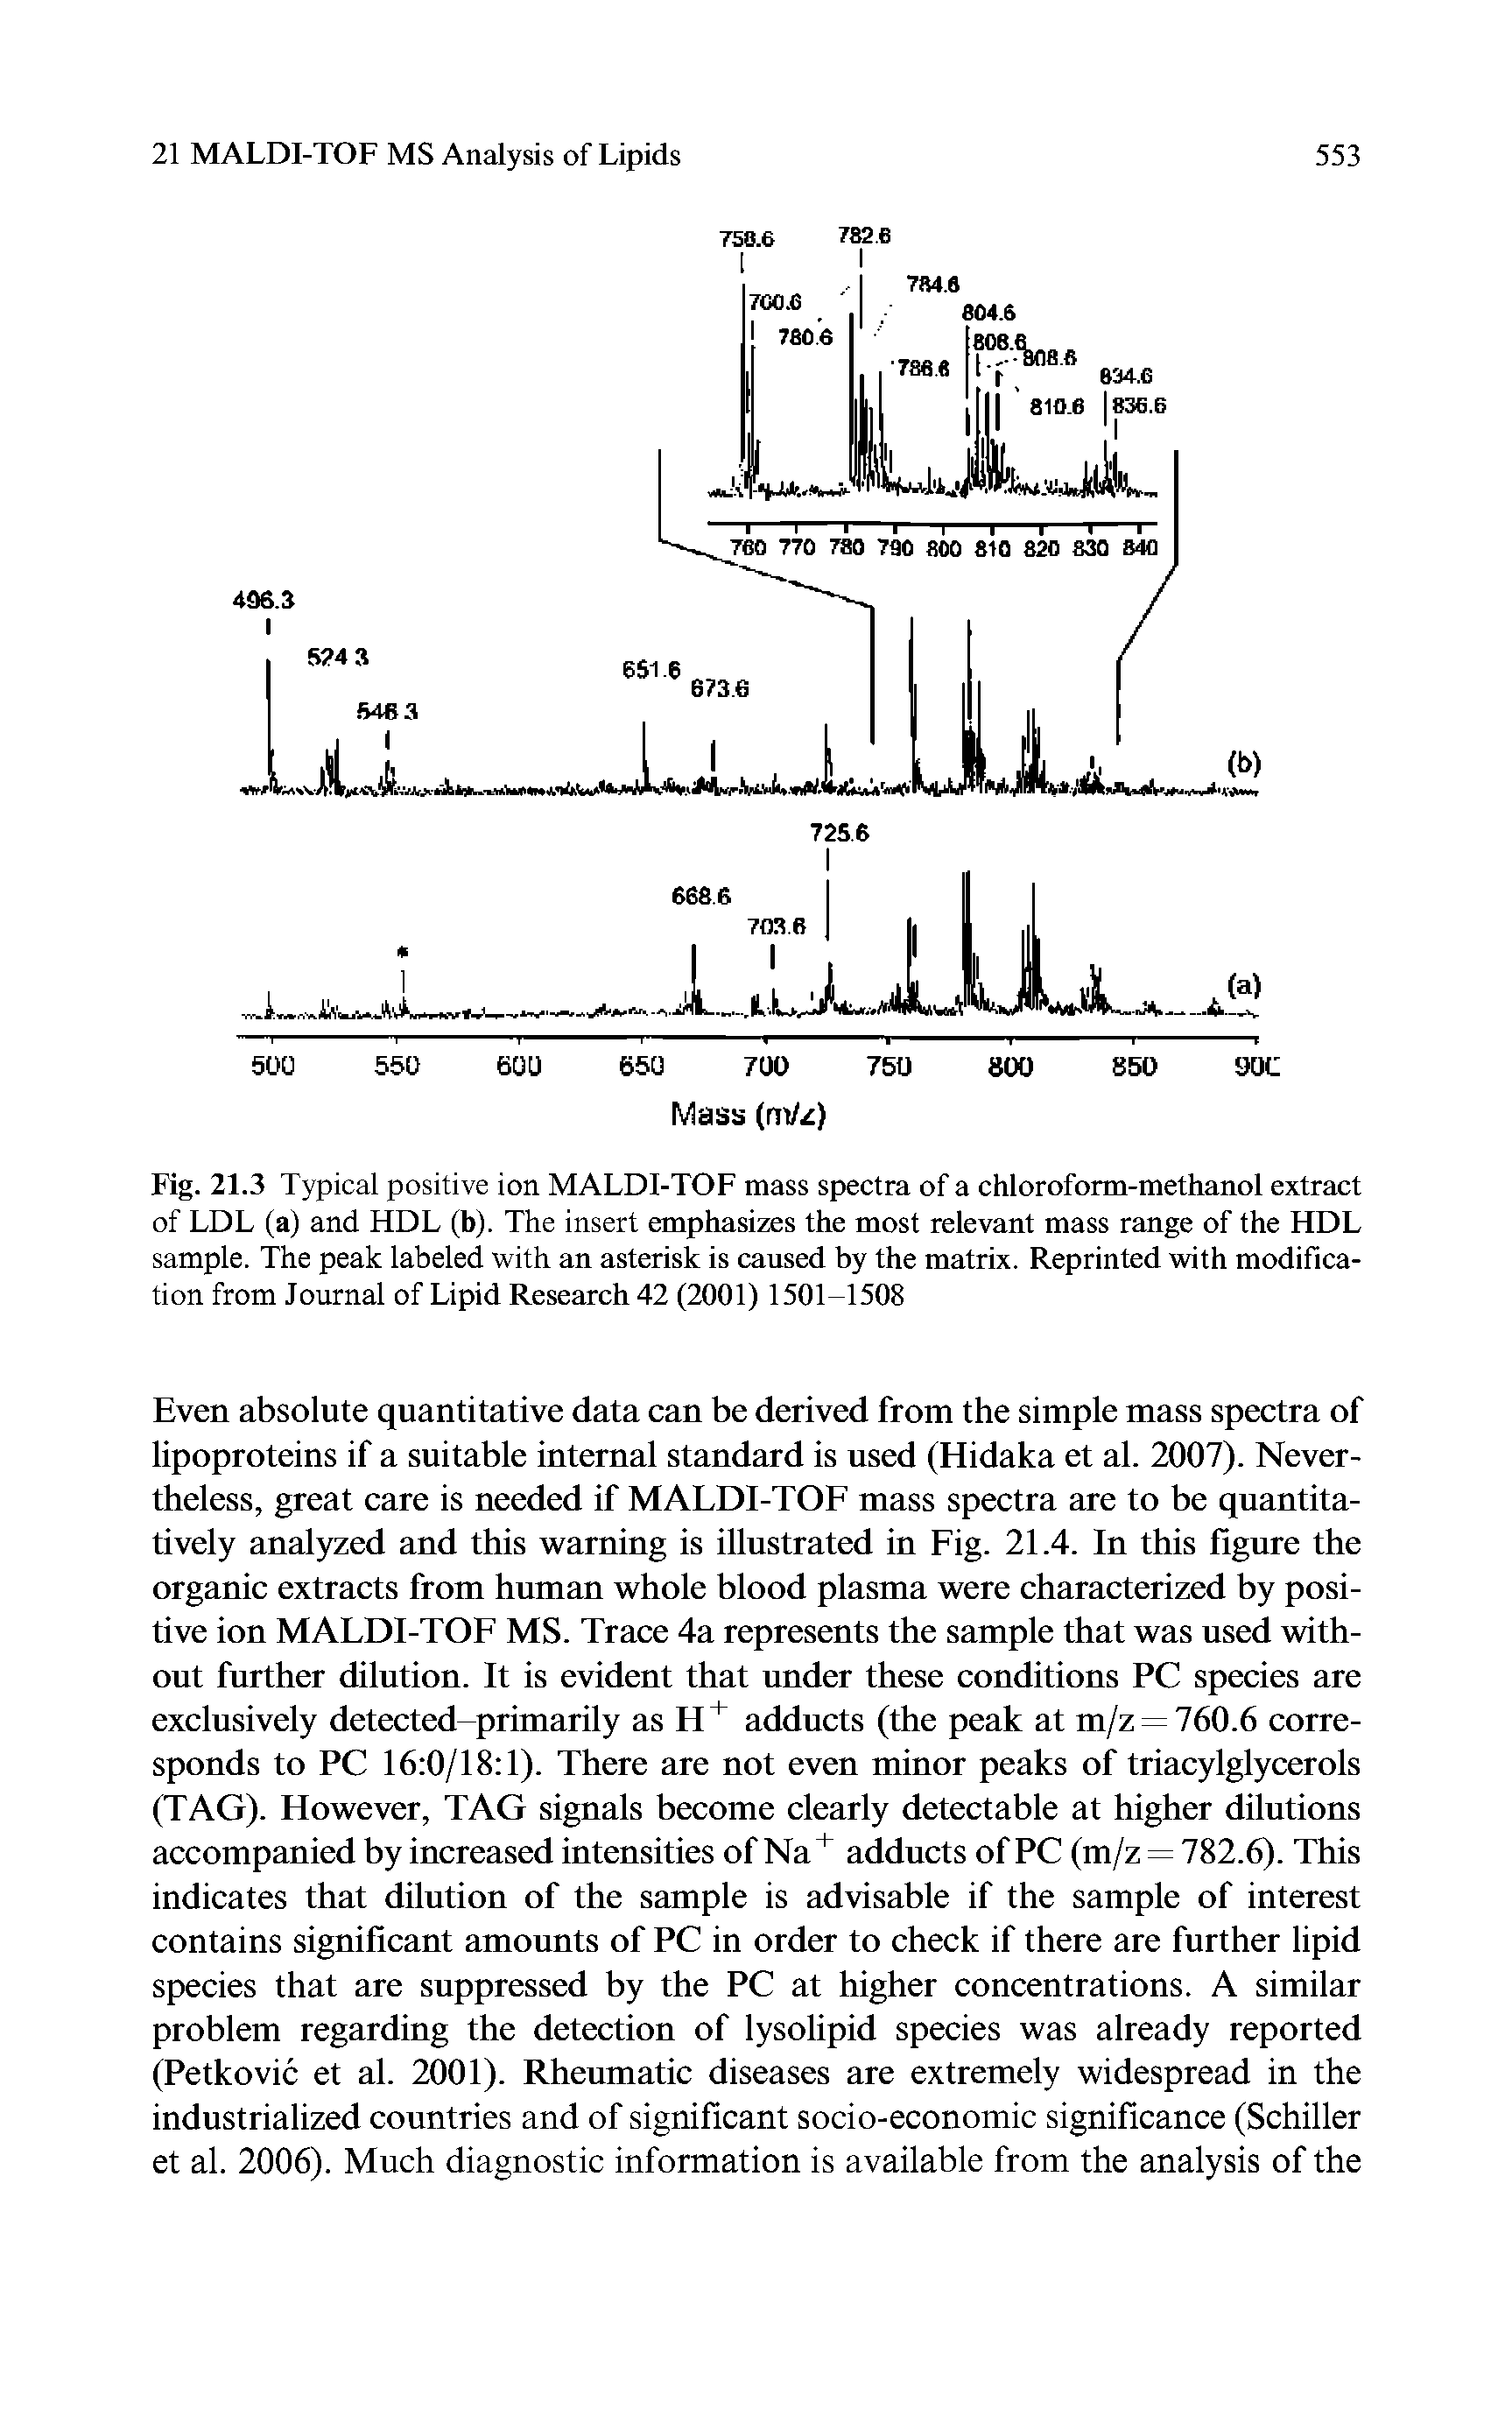 Fig. 21.3 Typical positive ion MALDI-TOF mass spectra of a chloroform-methanol extract of LDL (a) and HDL (b). The insert emphasizes the most relevant mass range of the FIDL sample. The peak labeled with an asterisk is caused by the matrix. Reprinted with modification from Journal of Lipid Research 42 (2001) 1501-1508...